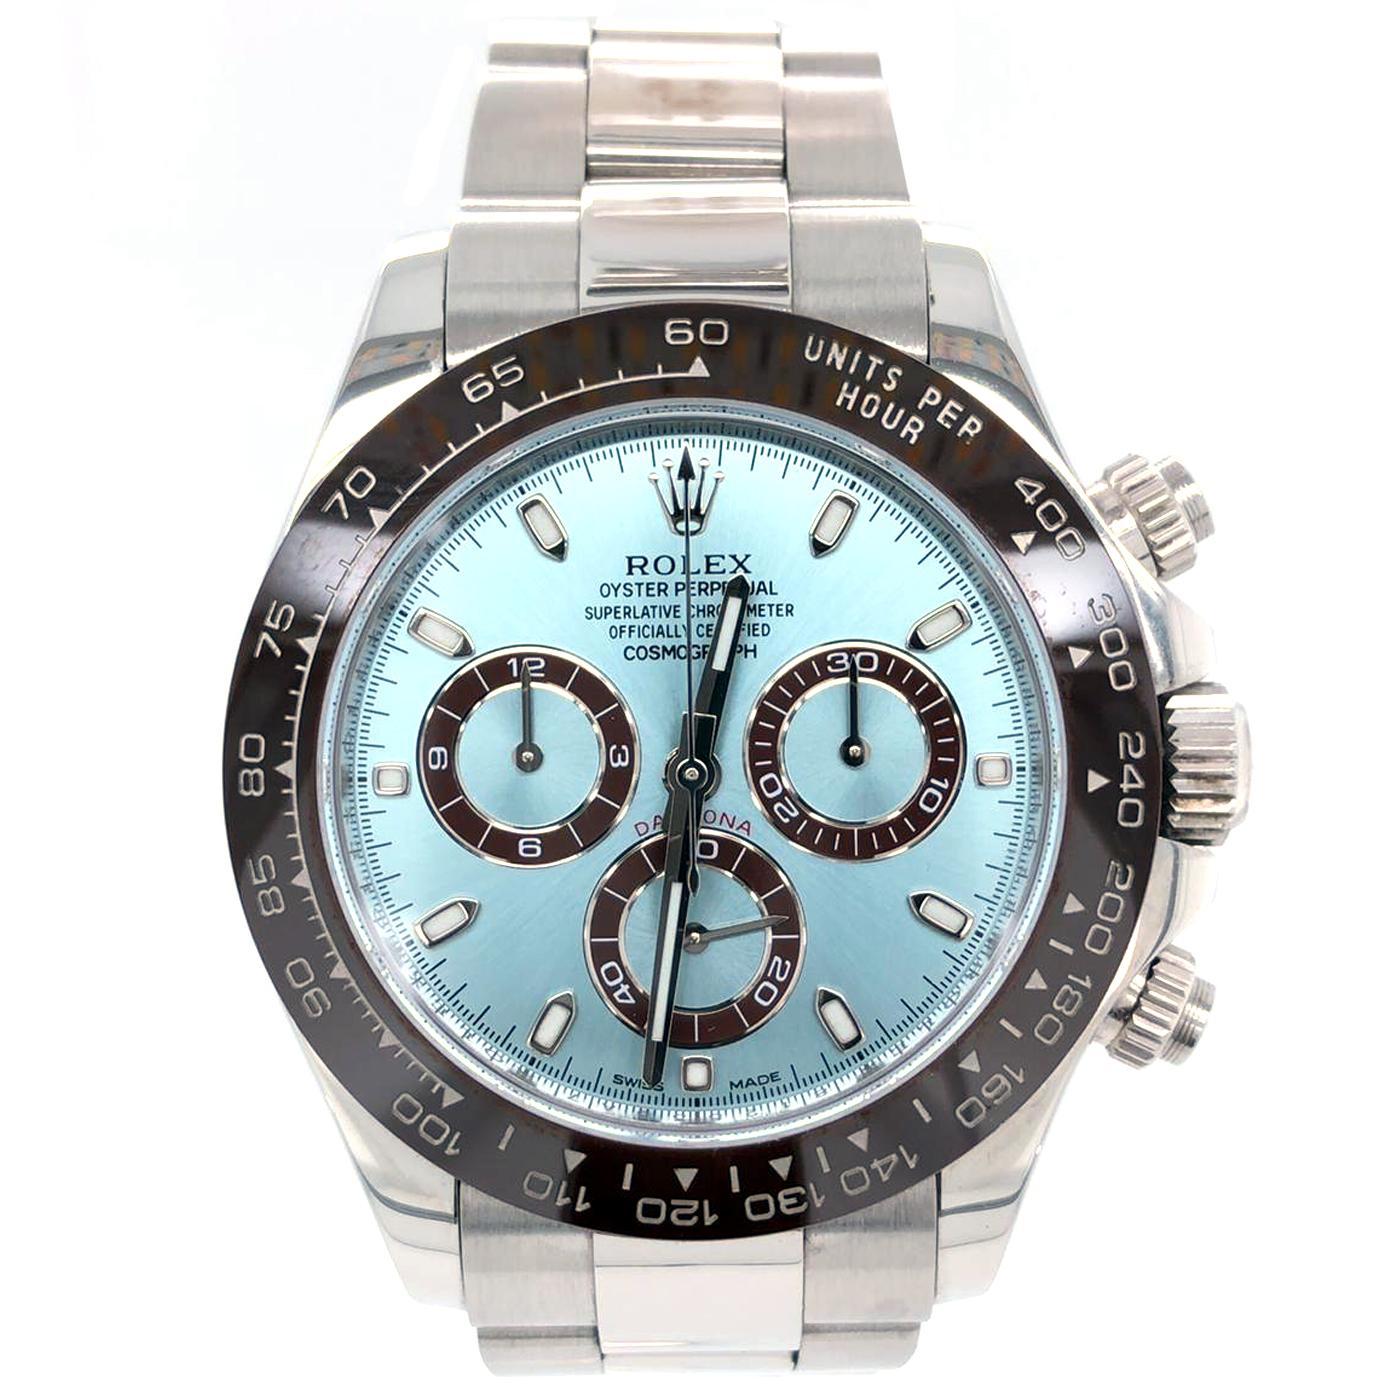 This oyster perpetual Cosmograph Daytona in platinum with an ice-blue dial and an oyster bracelet features a chestnut brown cerachrom bezel with a tachymetric scale. This chronograph was designed to be the ultimate timing tool for endurance racing